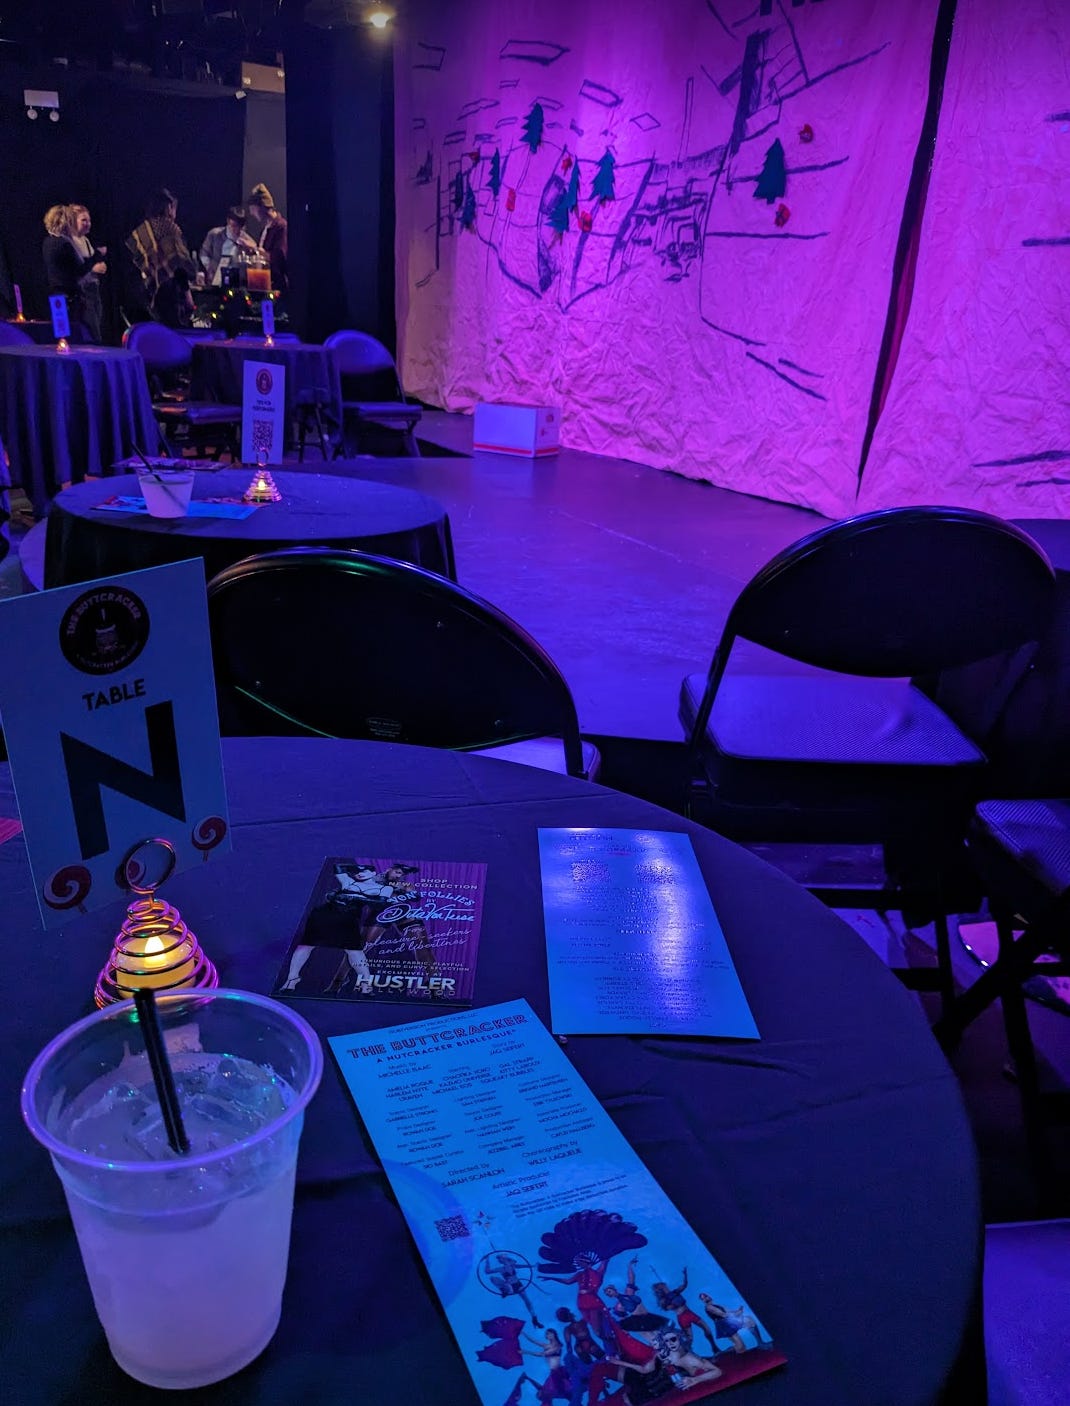 A purple light dimmed stage sits across from foldable black chairs. There is a margarita drink in a plastic cup on a table next to the flyer for the Buttcracker show